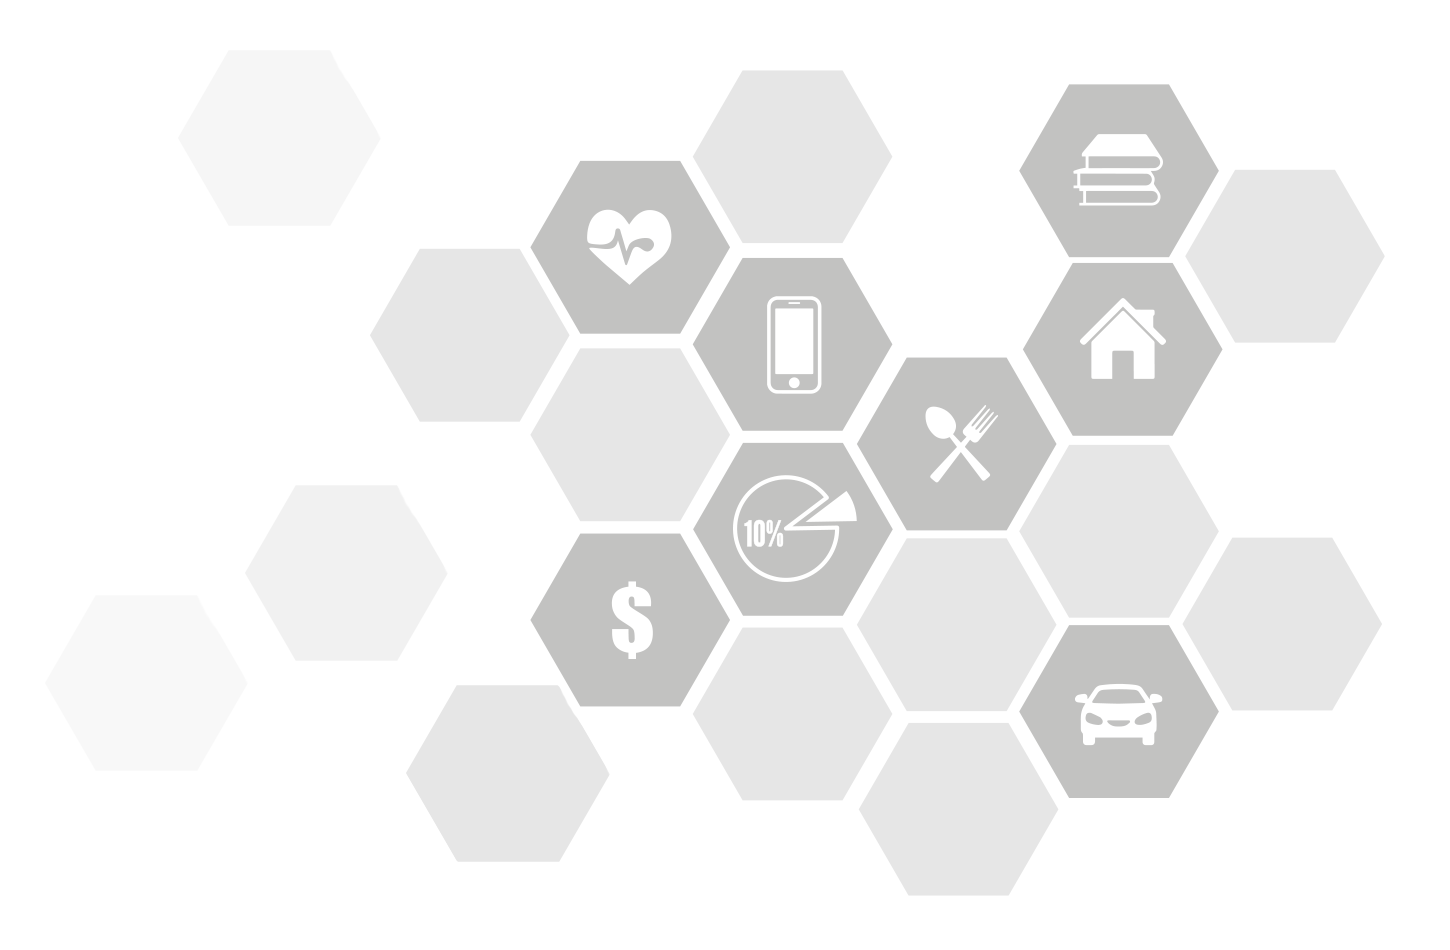 Hexagon grid with icons representing the essential household budget elements